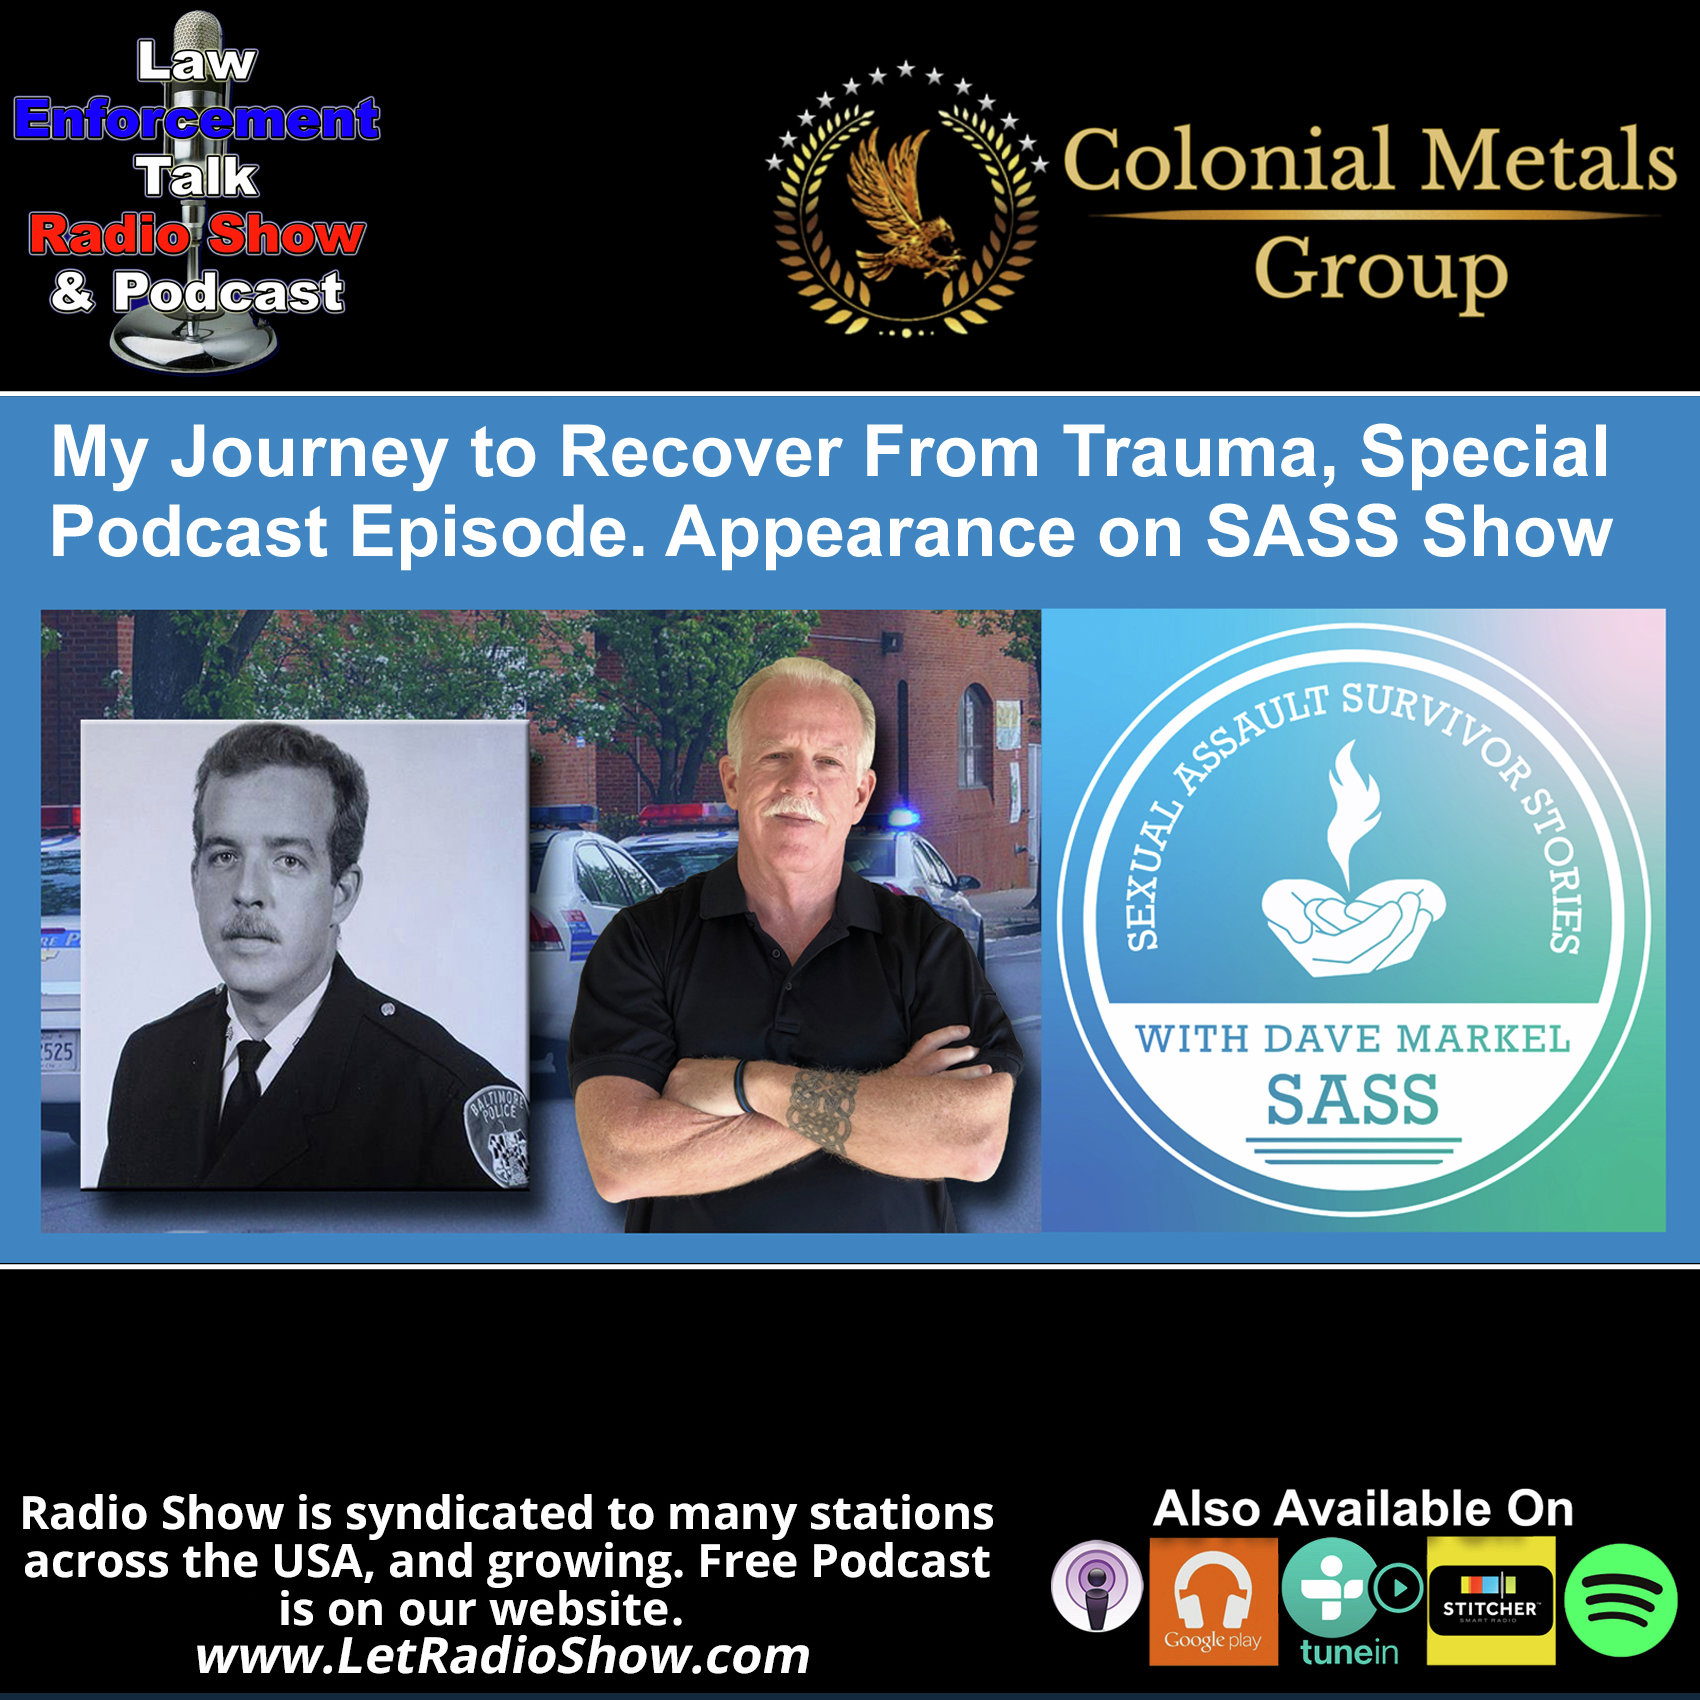 My Journey to Recover From Trauma Special Podcast Episode